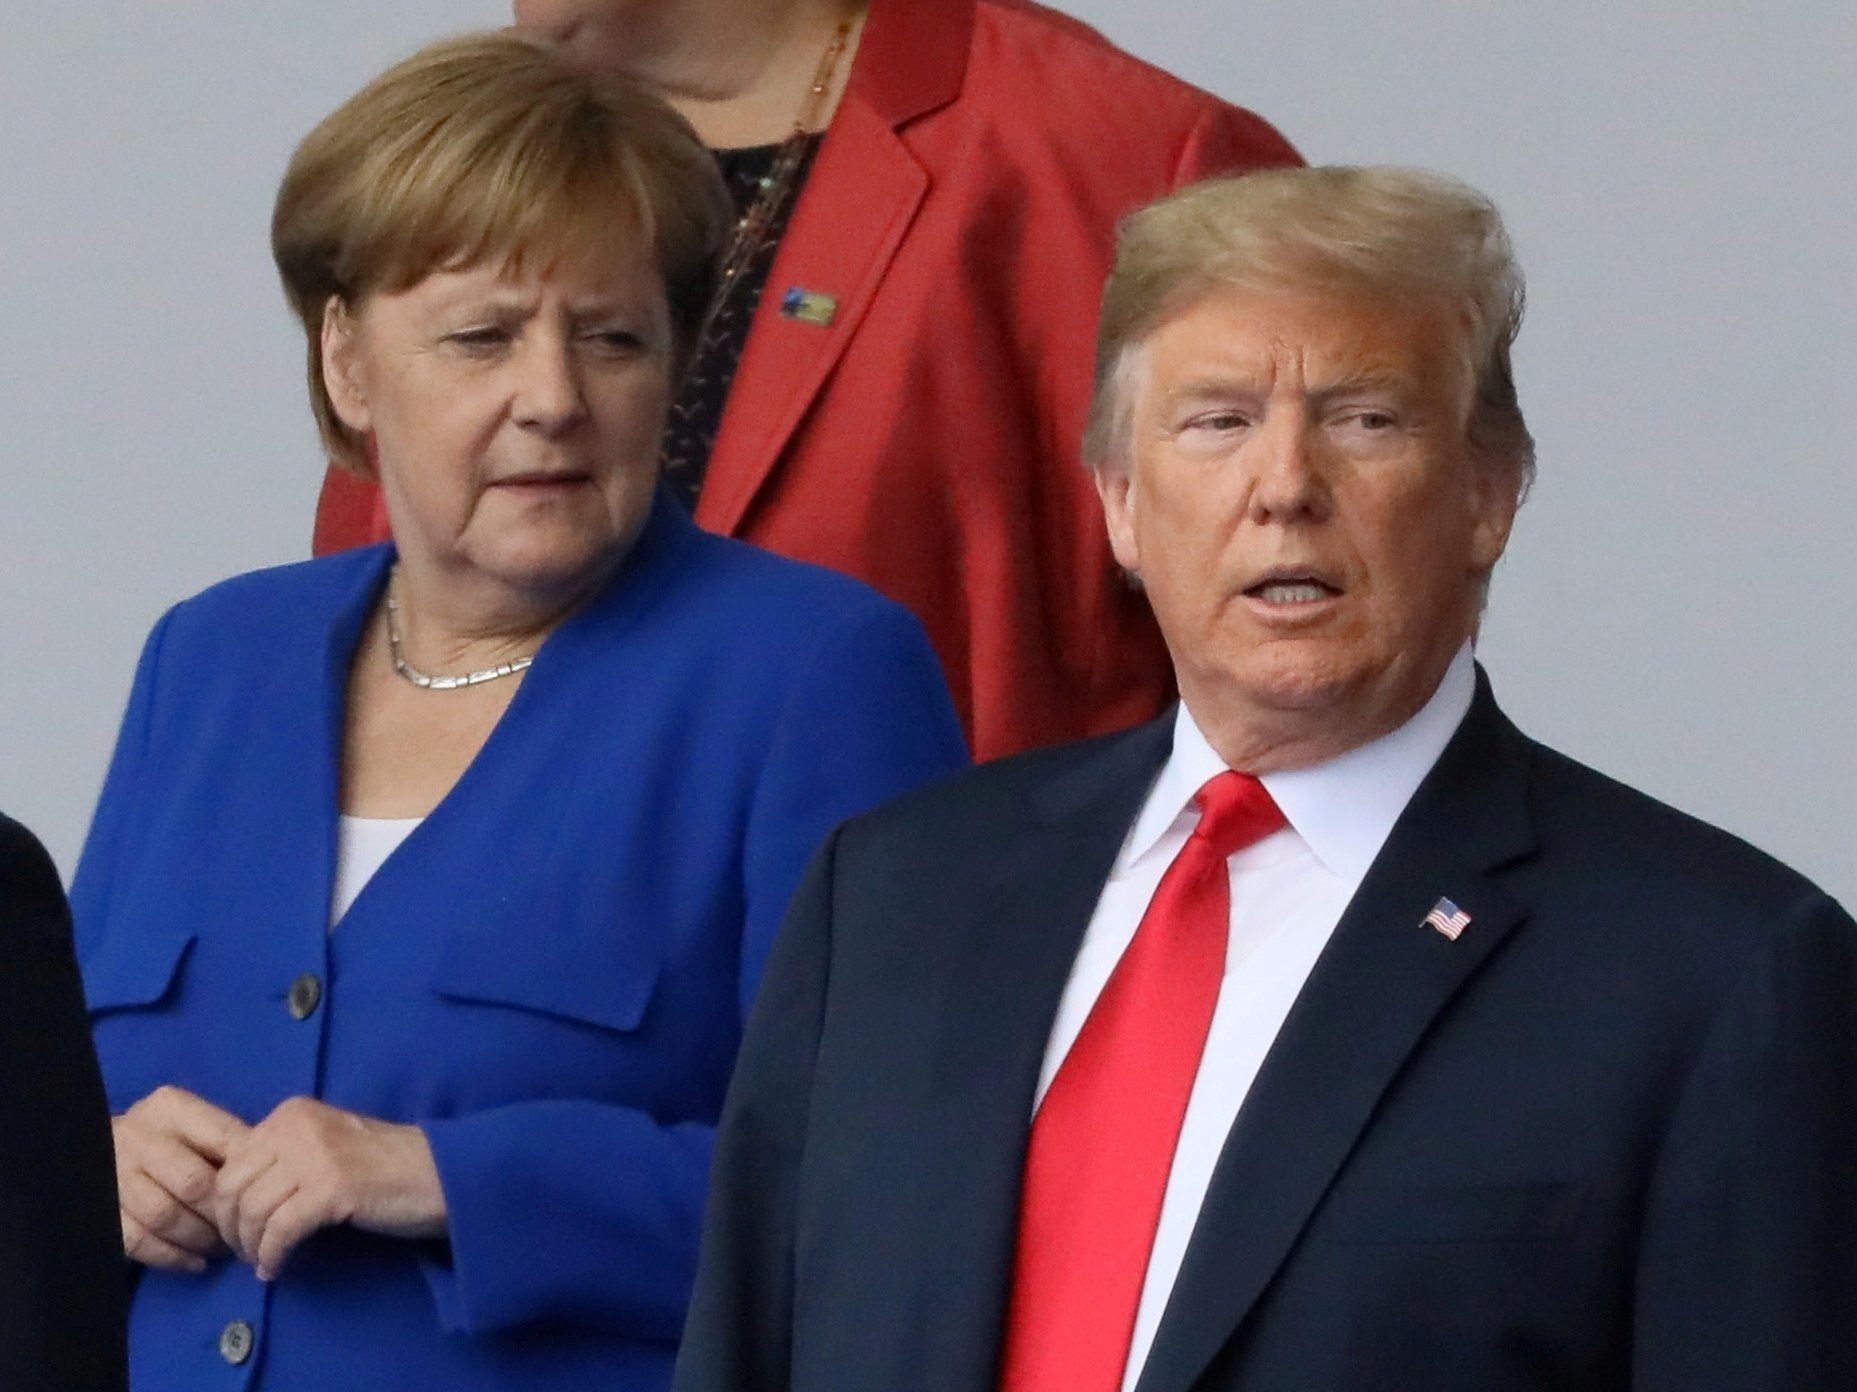 Donald Trump called Germany a 'captive' of Russia